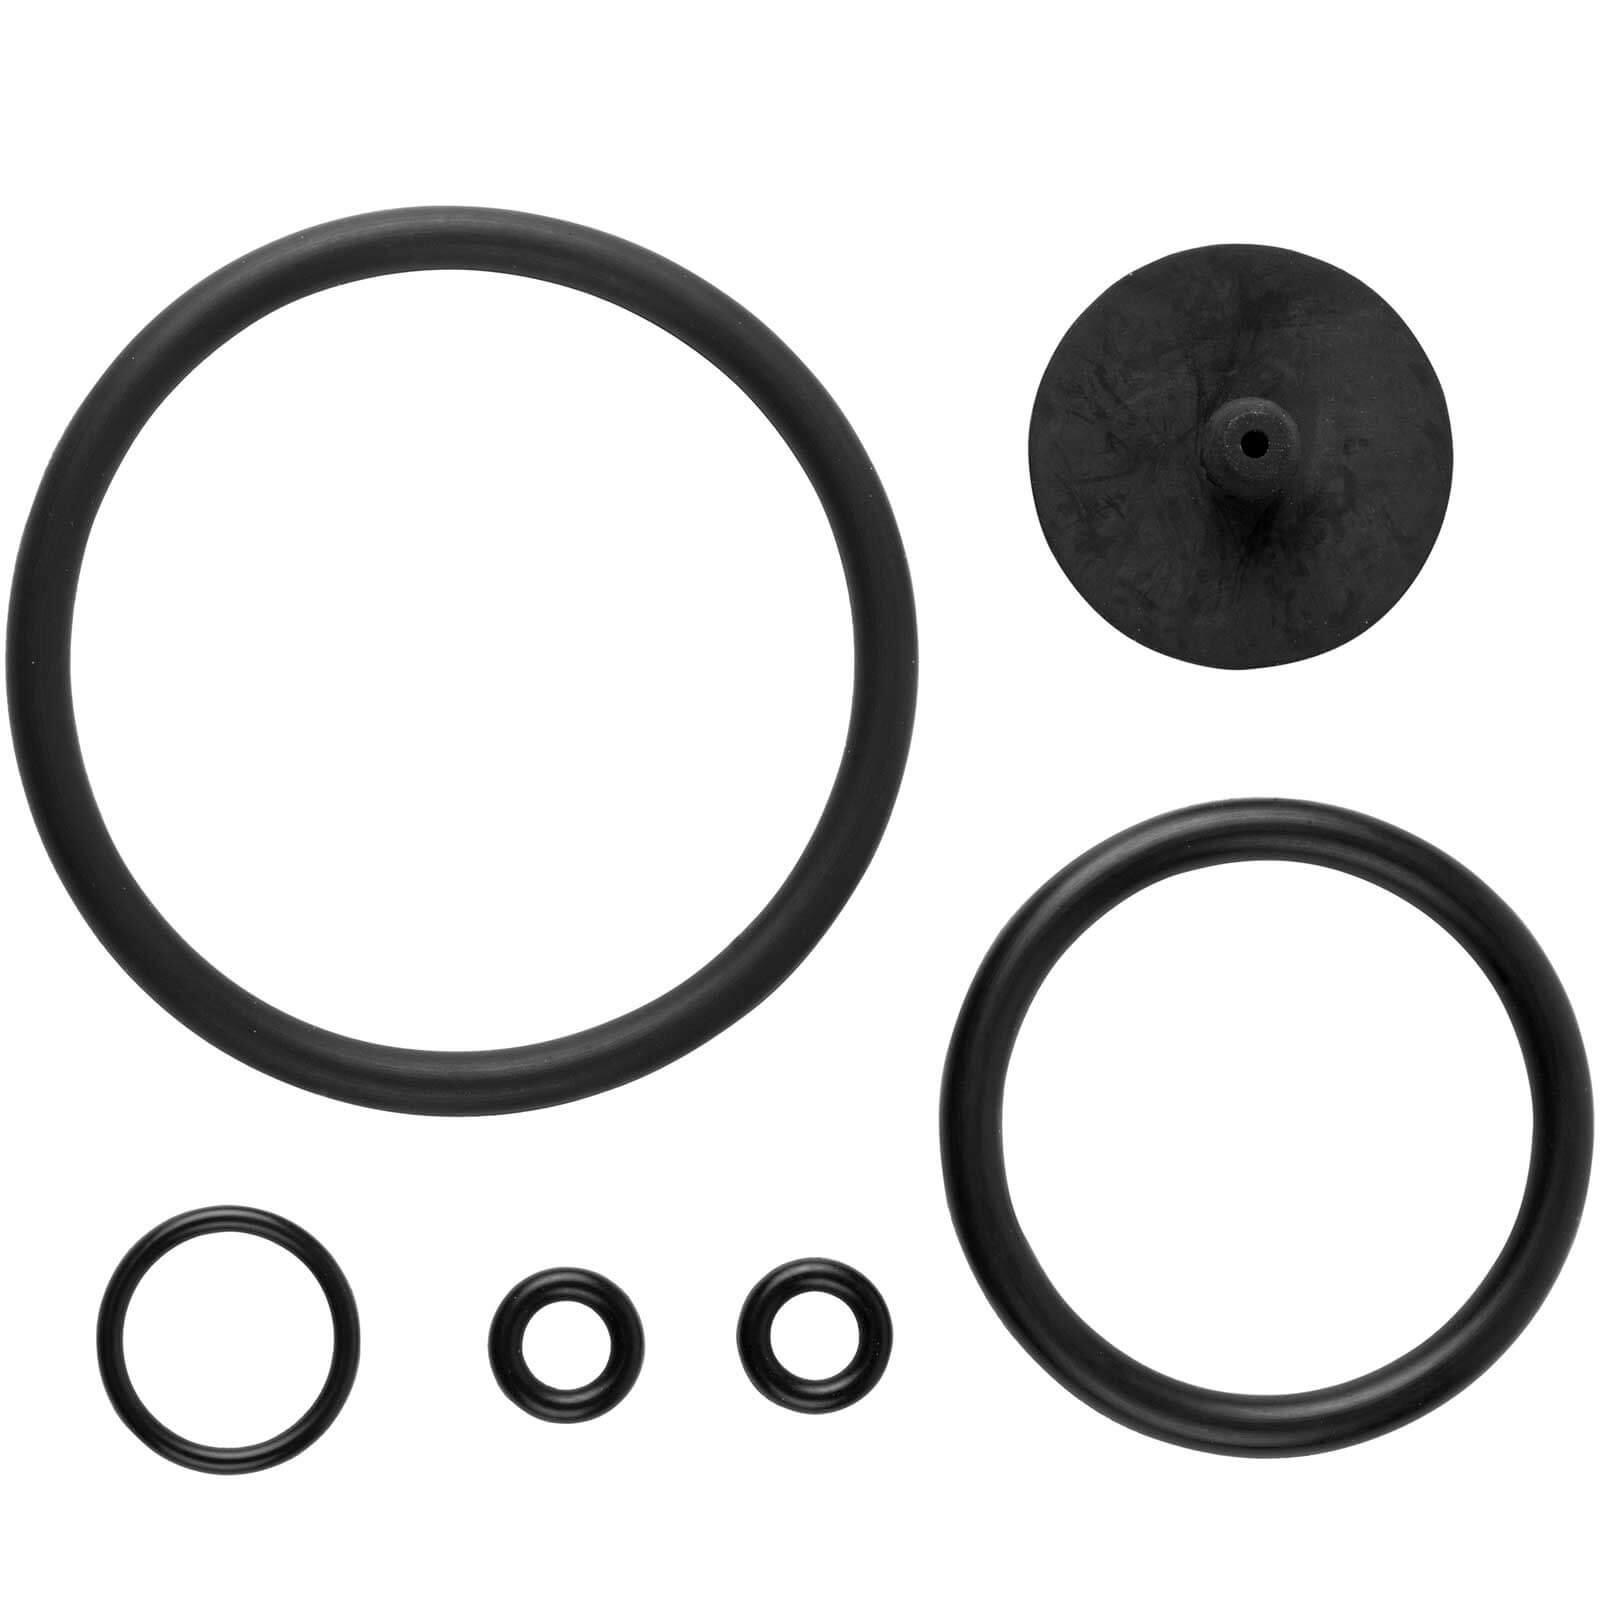 Photo of Gardena Washer Set For 867 And 869 Pressure Sprayers